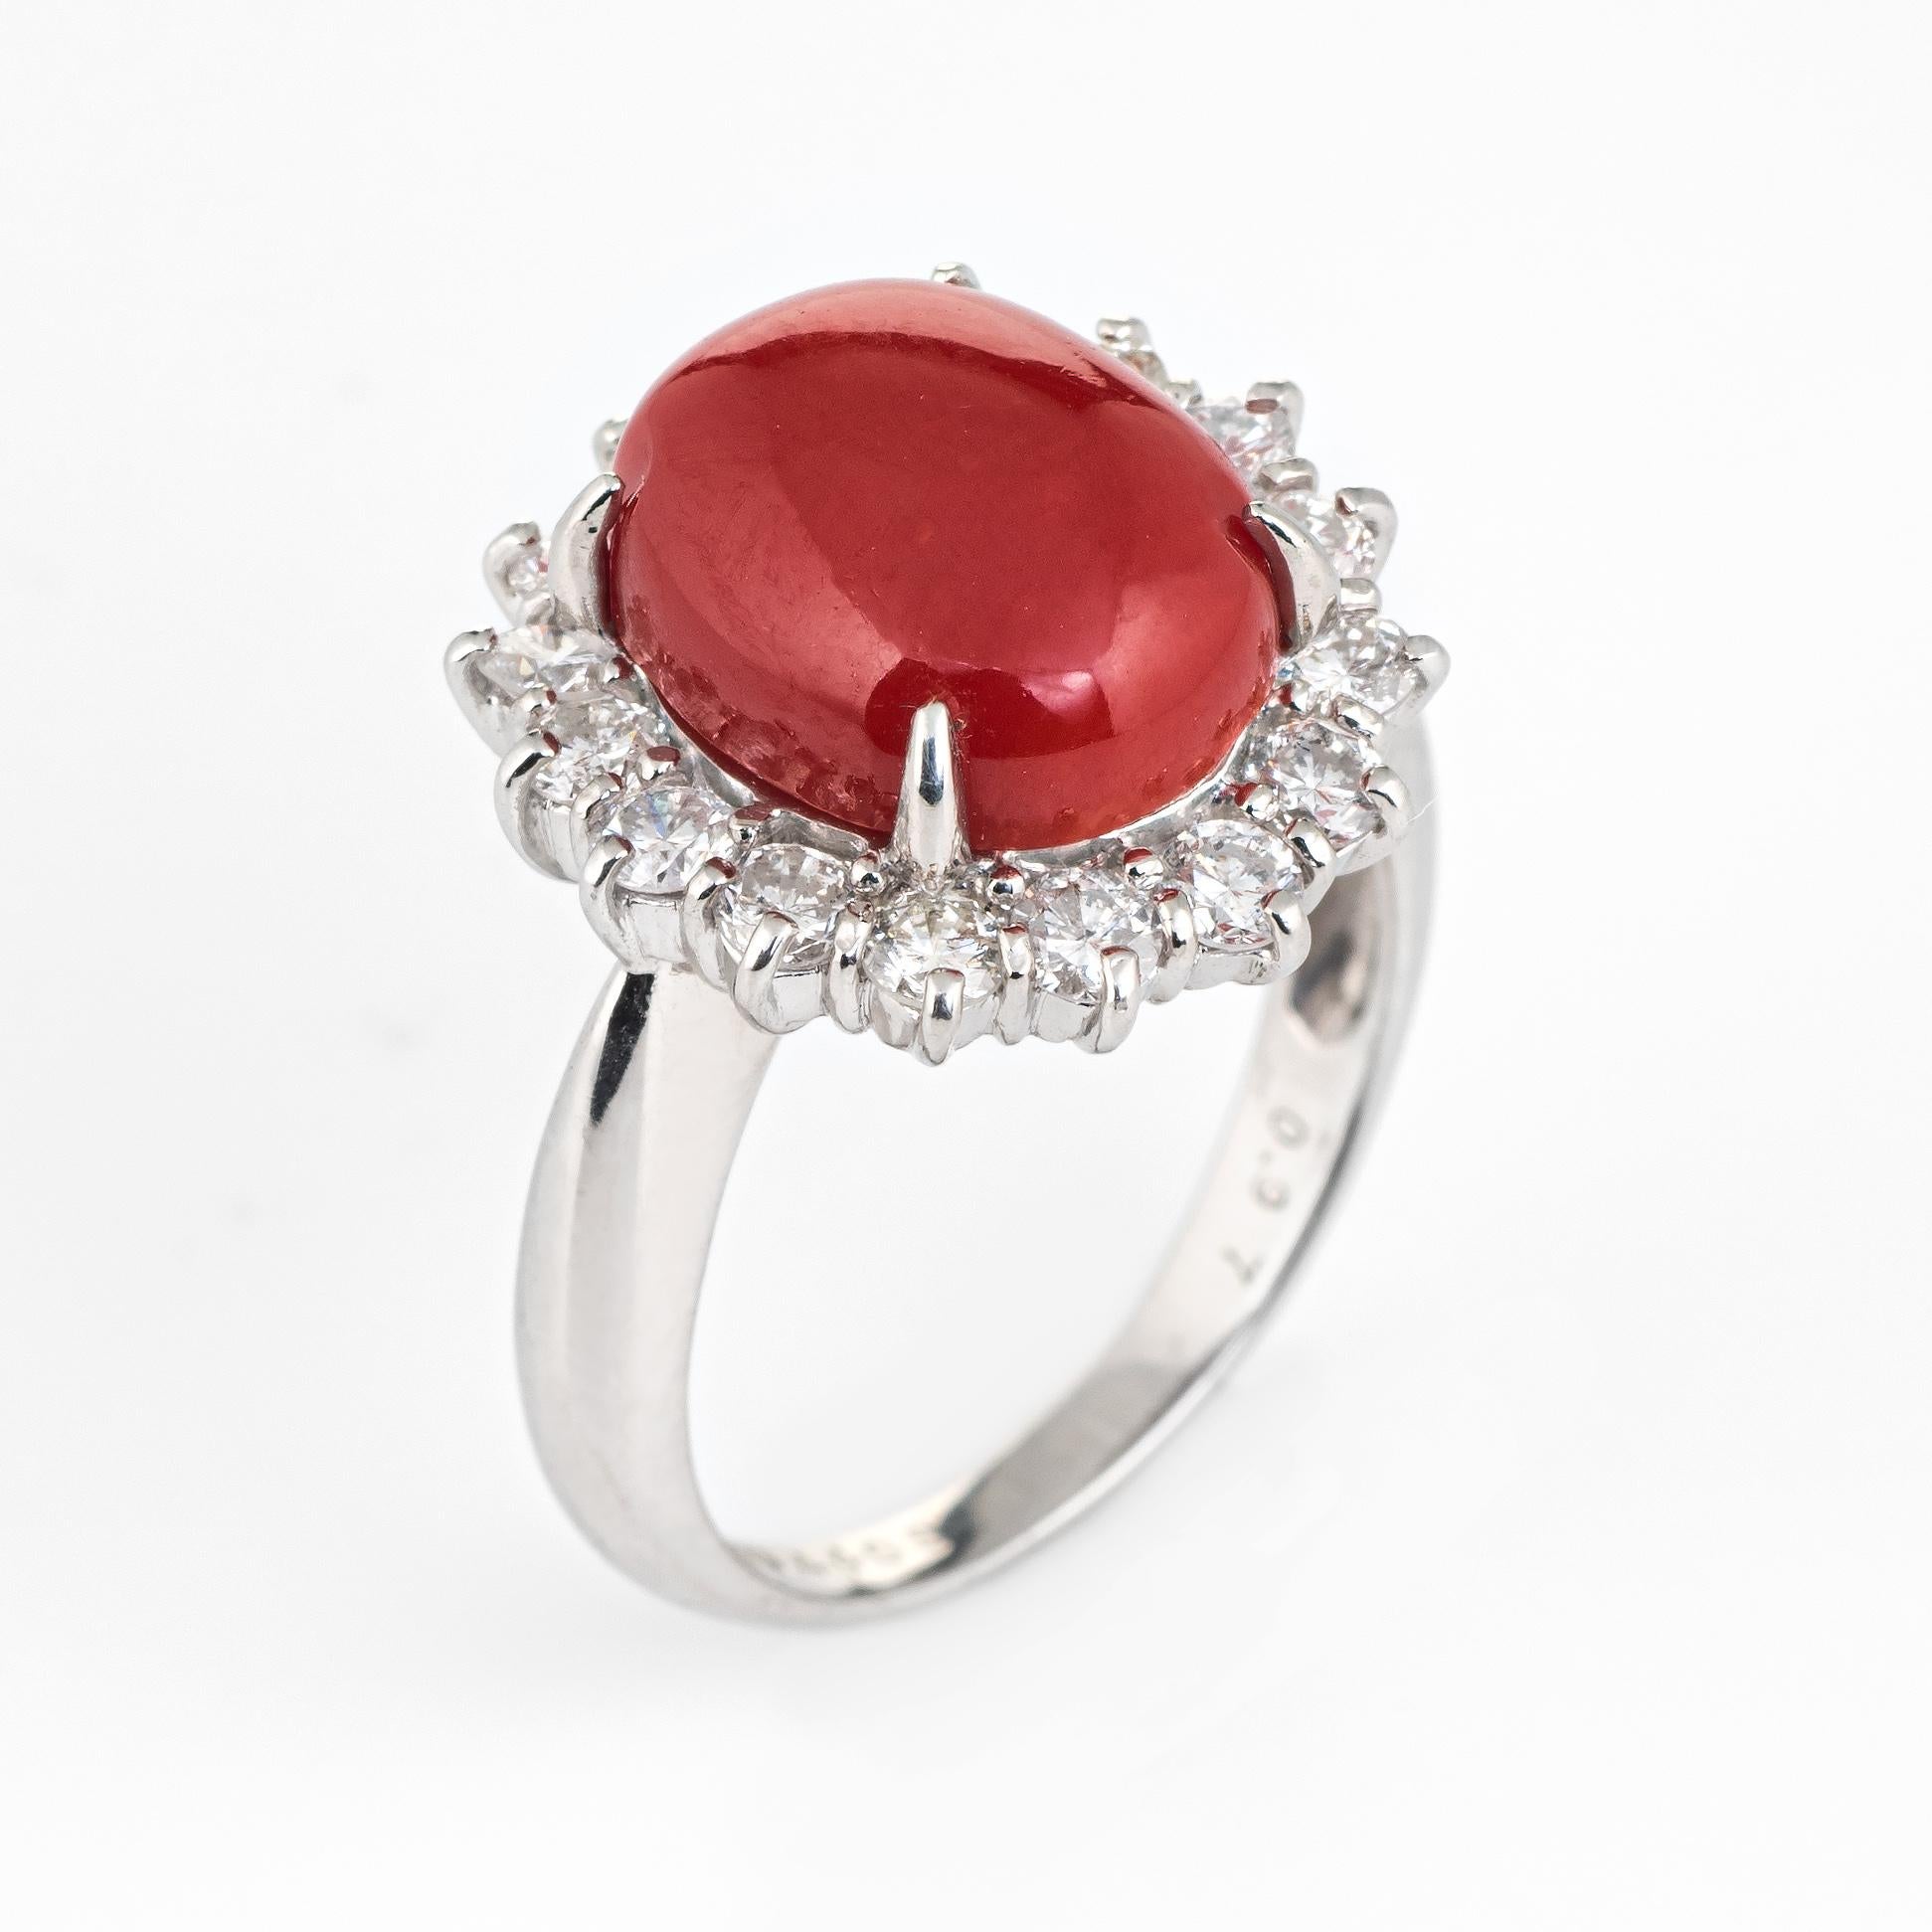 Elegant estate ox blood red coral & diamond ring crafted in 900 platinum. 

Cabochon red coral measures 12mm x 10mm (estimated at 4.40 carats), accented with an estimated 0.97 carats of diamonds (estimated at G-H color and VS2-SI1 clarity). Note: